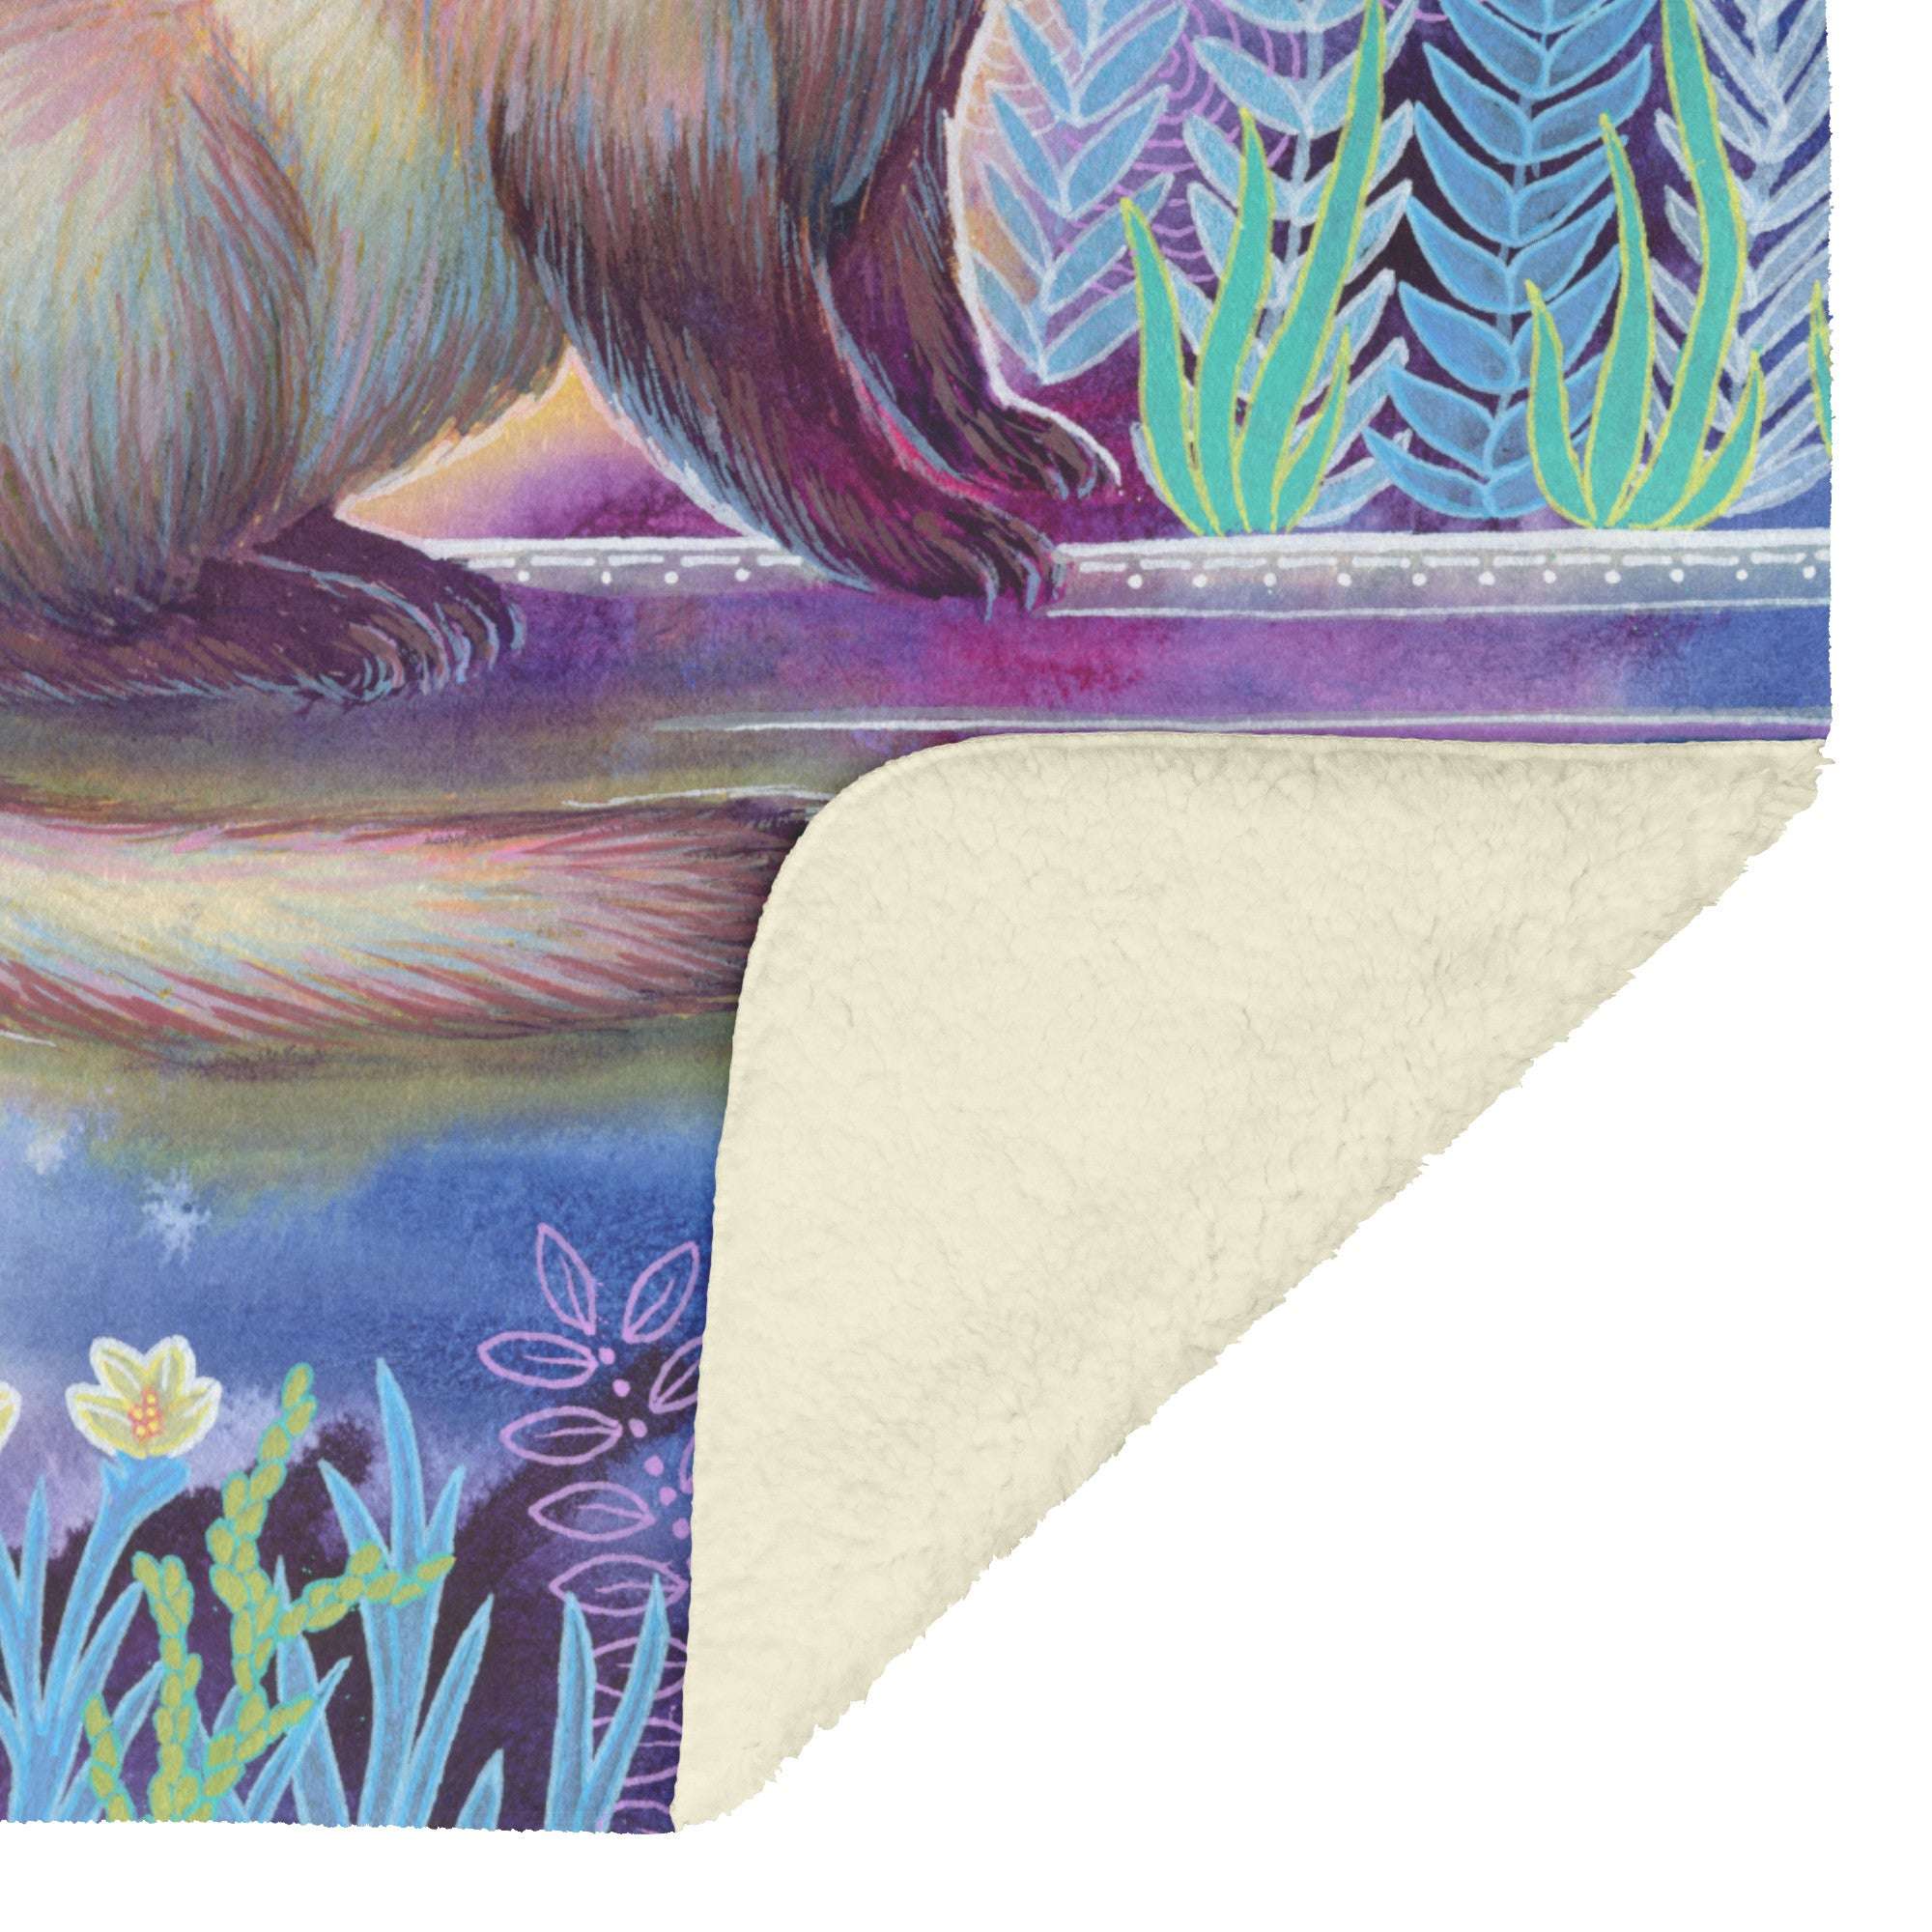 A detailed illustration of a ferret with vibrant, colorful plant life and stylized patterns, with the Sherpa fleece corner of the bottom right of the Ferret Blanket.